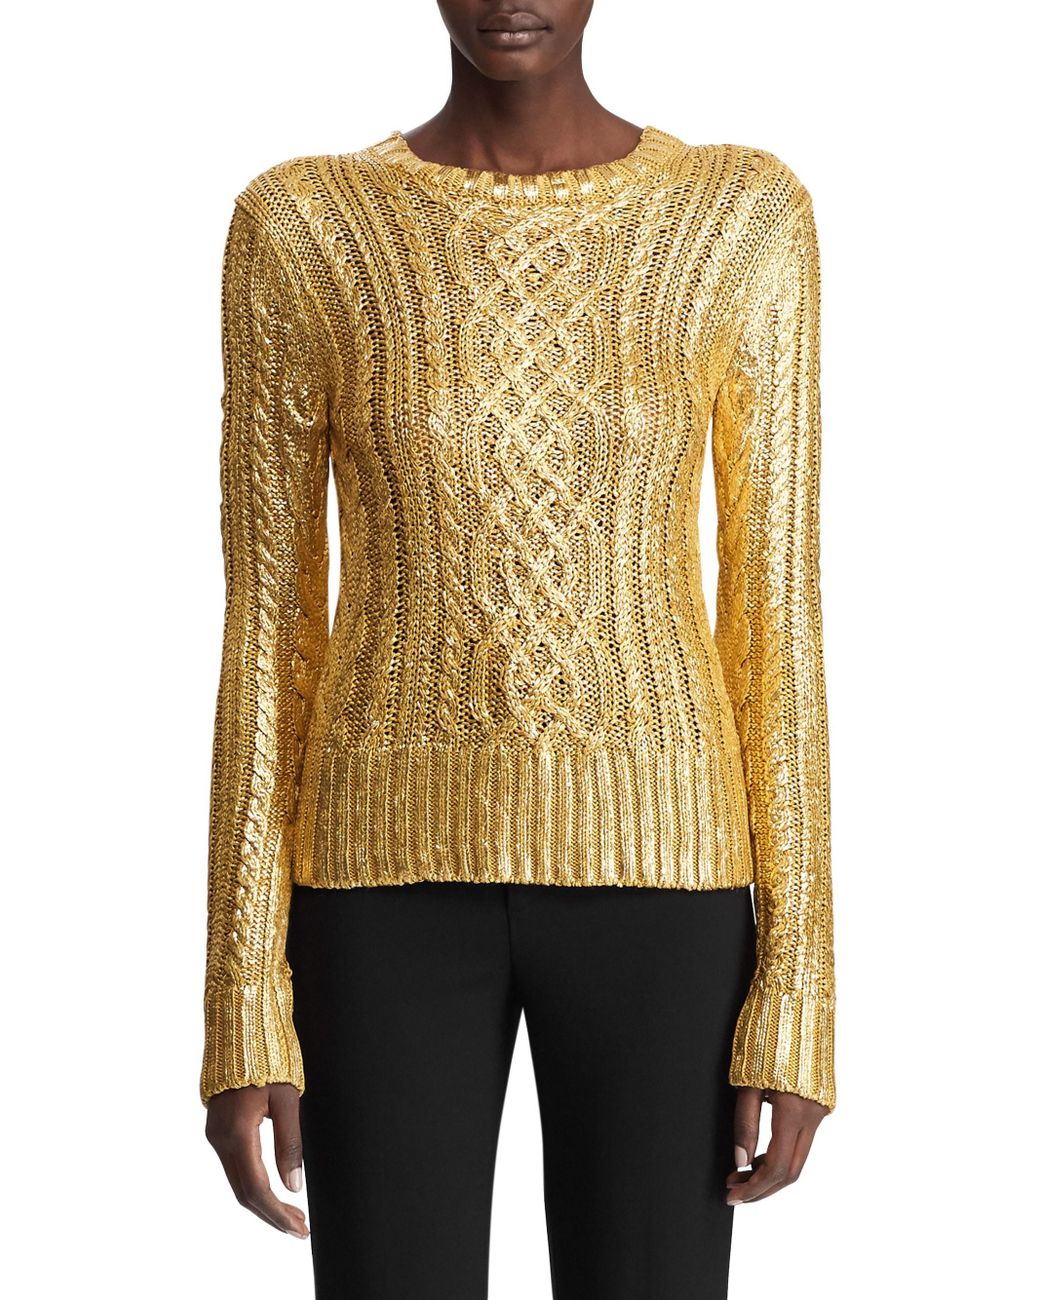 Ralph Lauren Collection Gold Foil Cable Knit Sweater in Metallic | Lyst